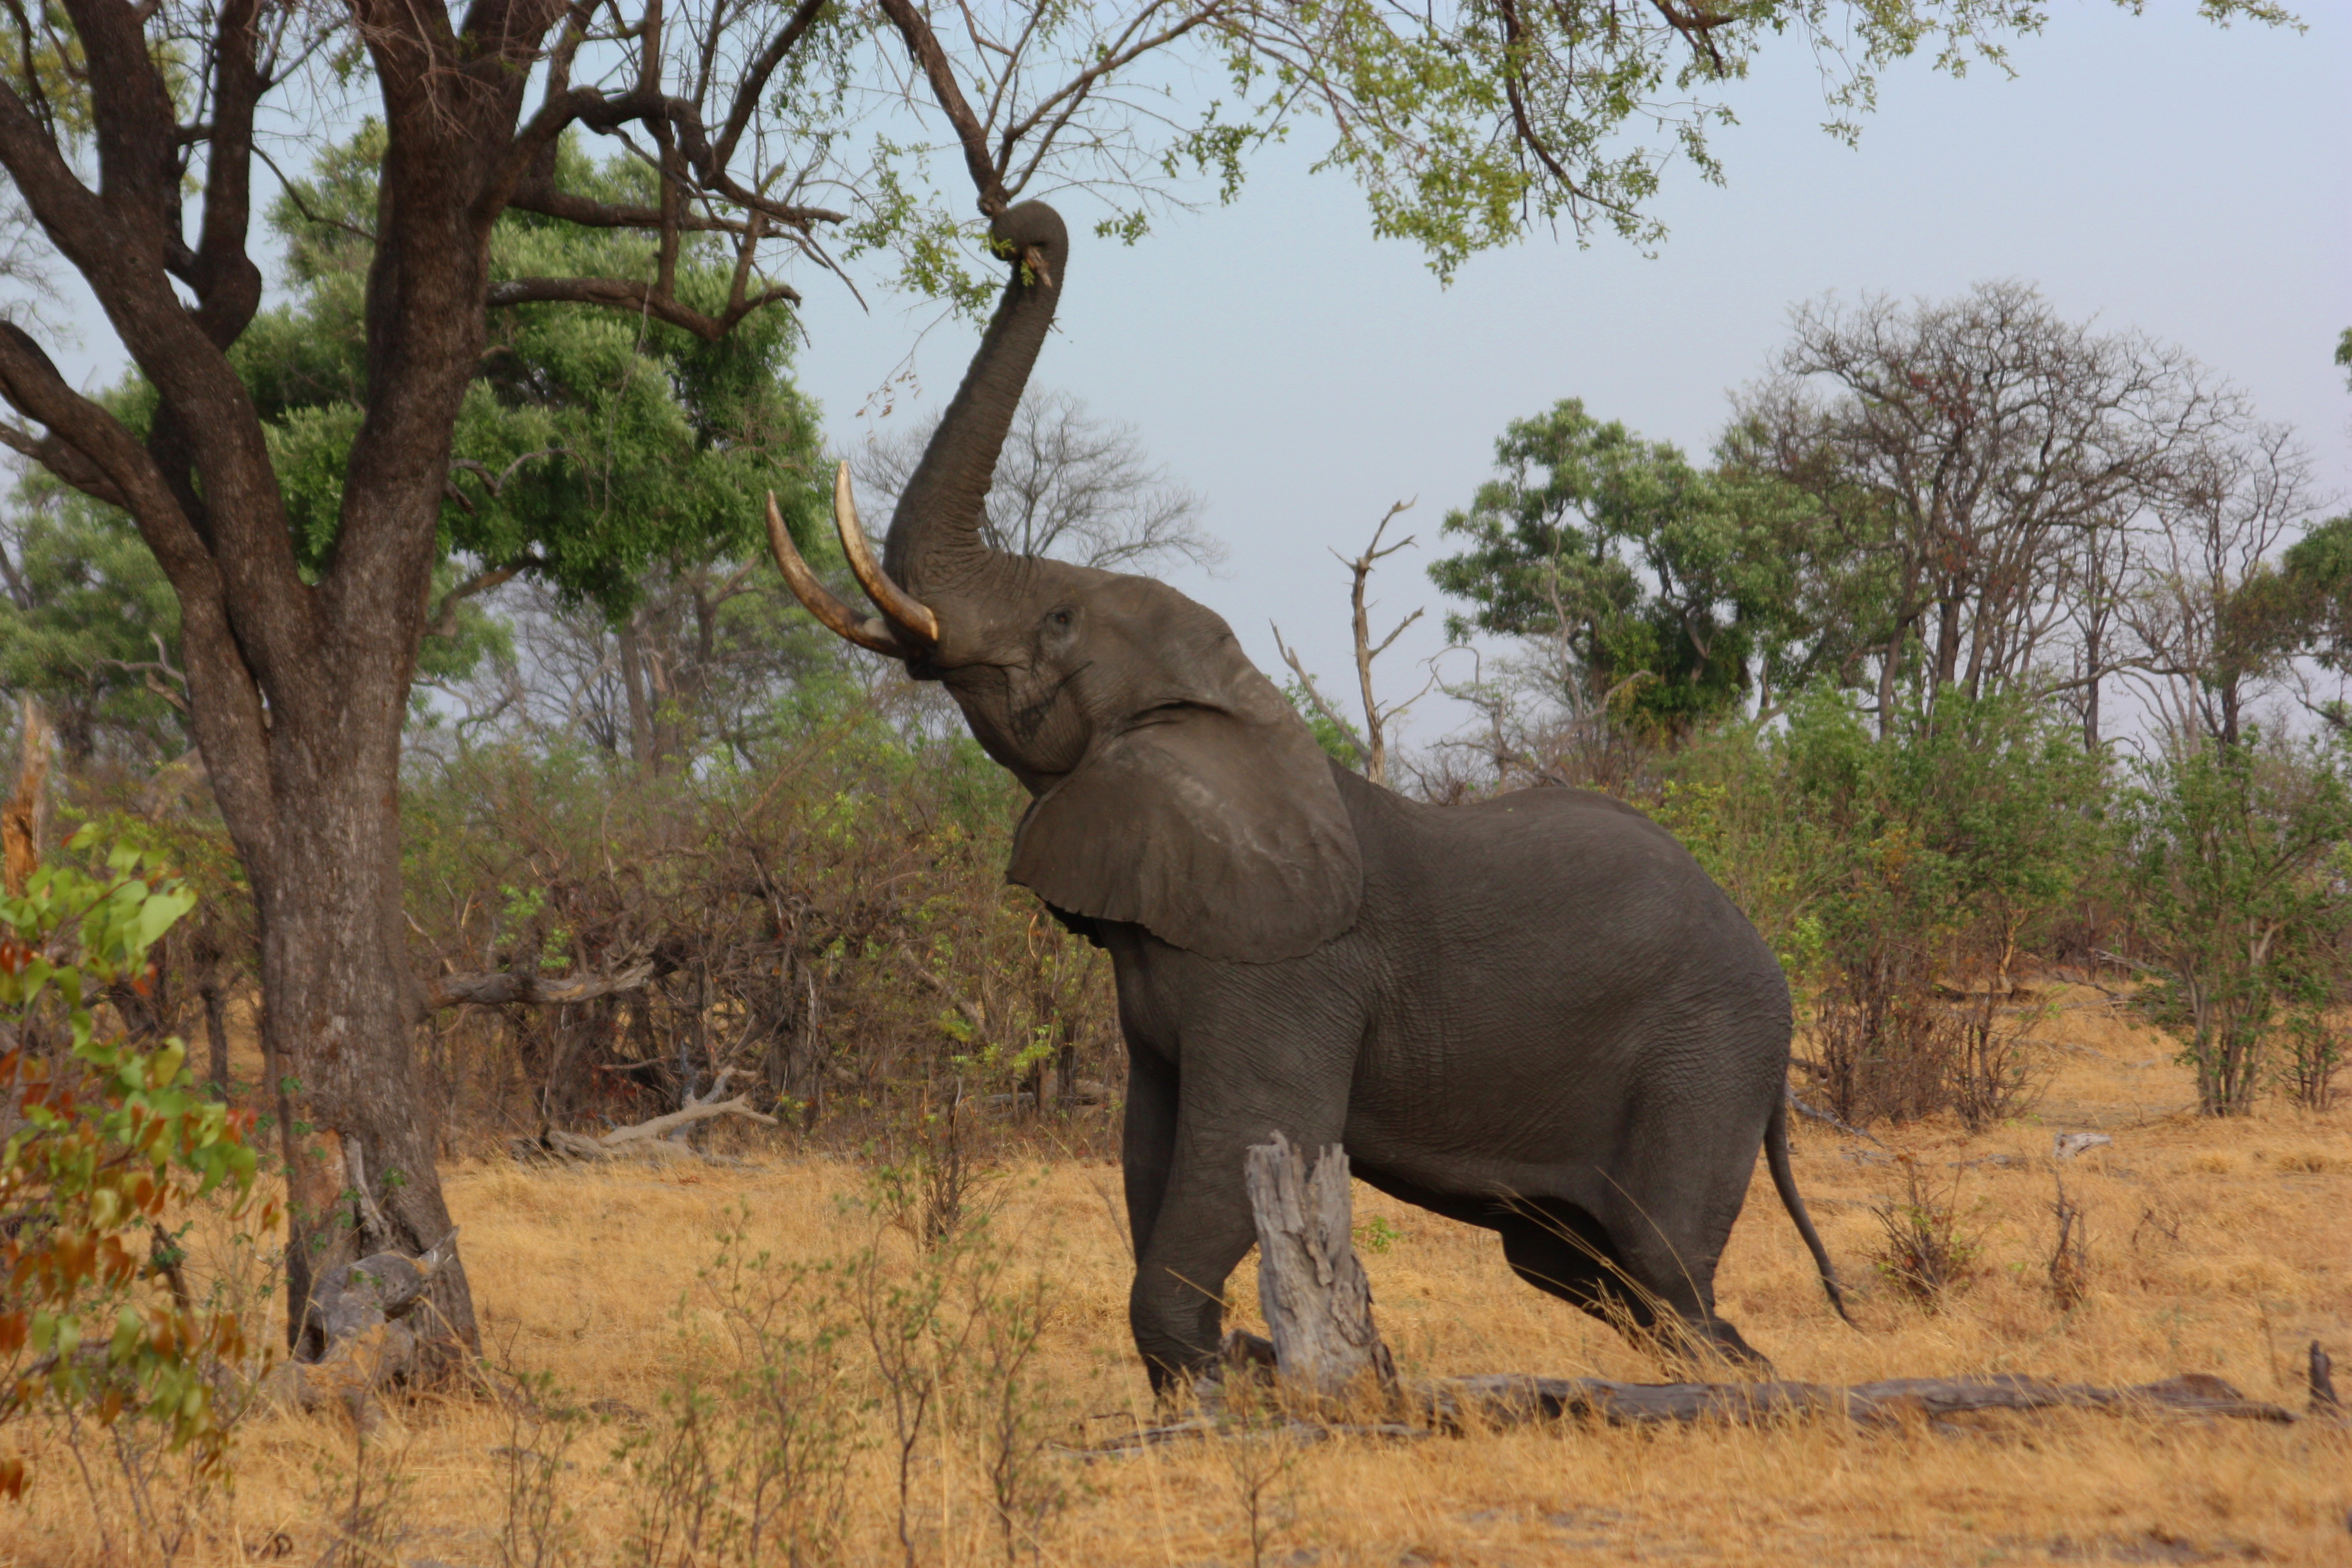 We've all heard an elephants trumpet, but how about music from sounds we can't hear?